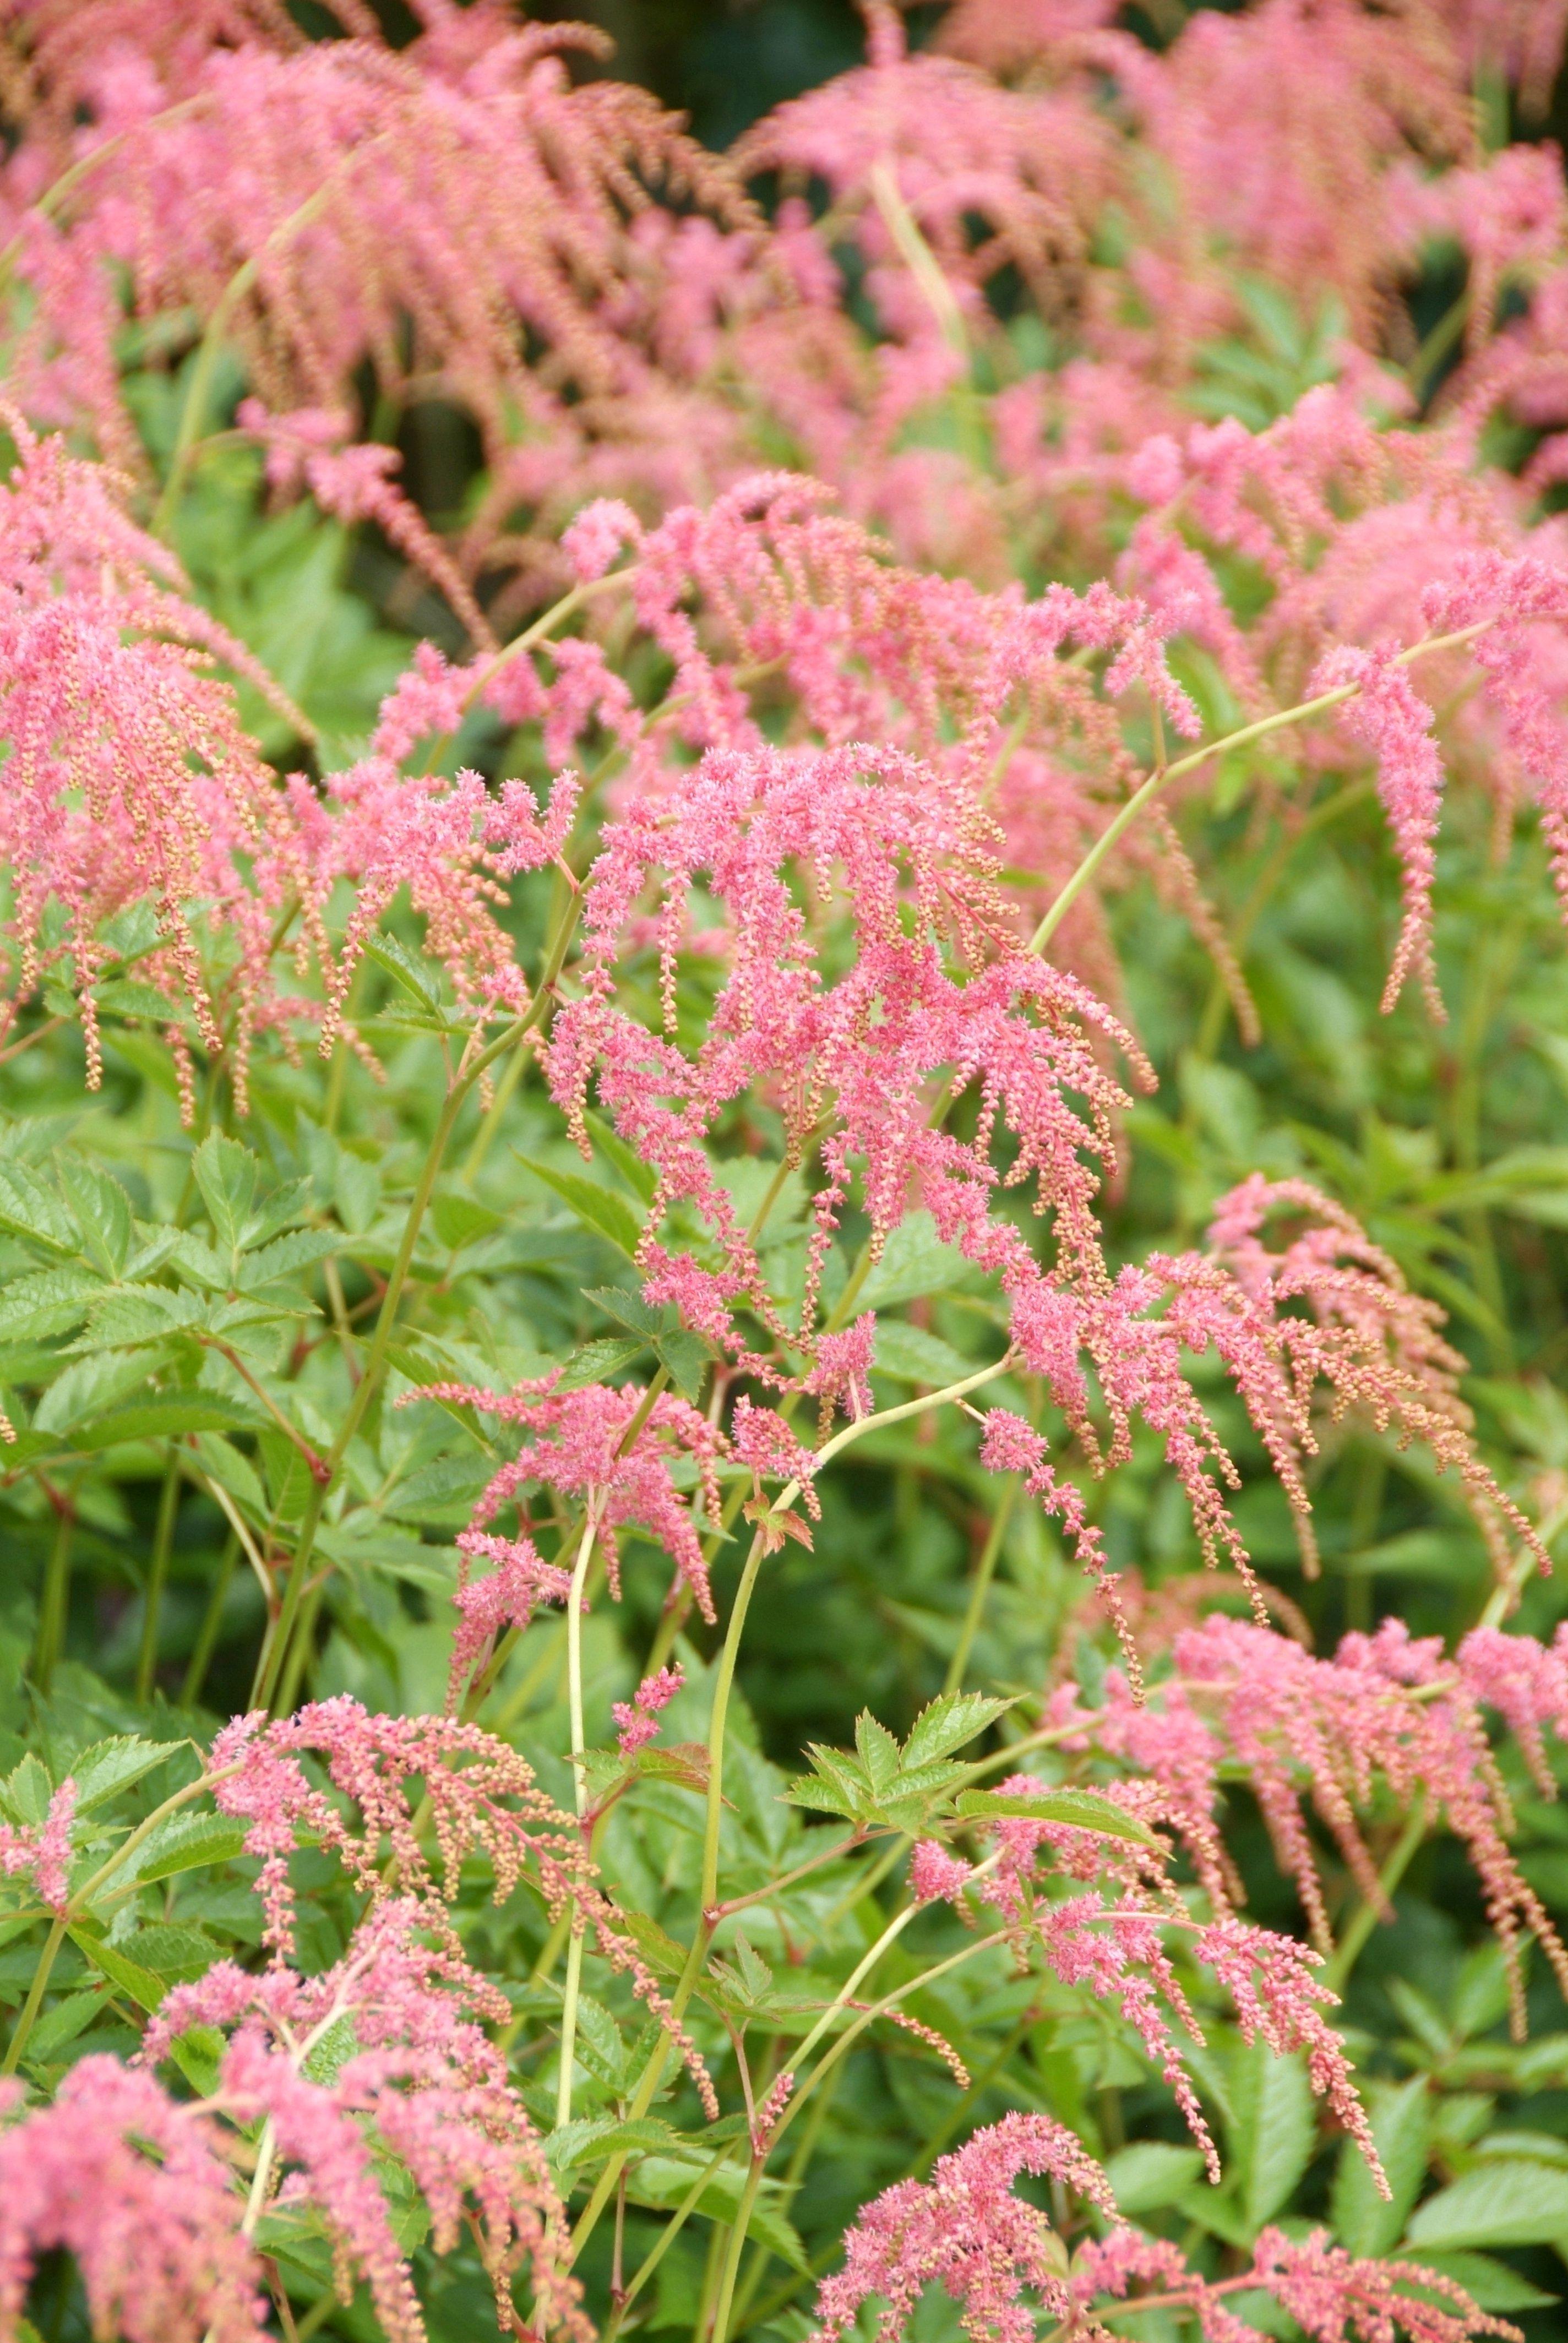 False Spirea Astilbe thunbergii Ostrich Plume from Growing Colors.